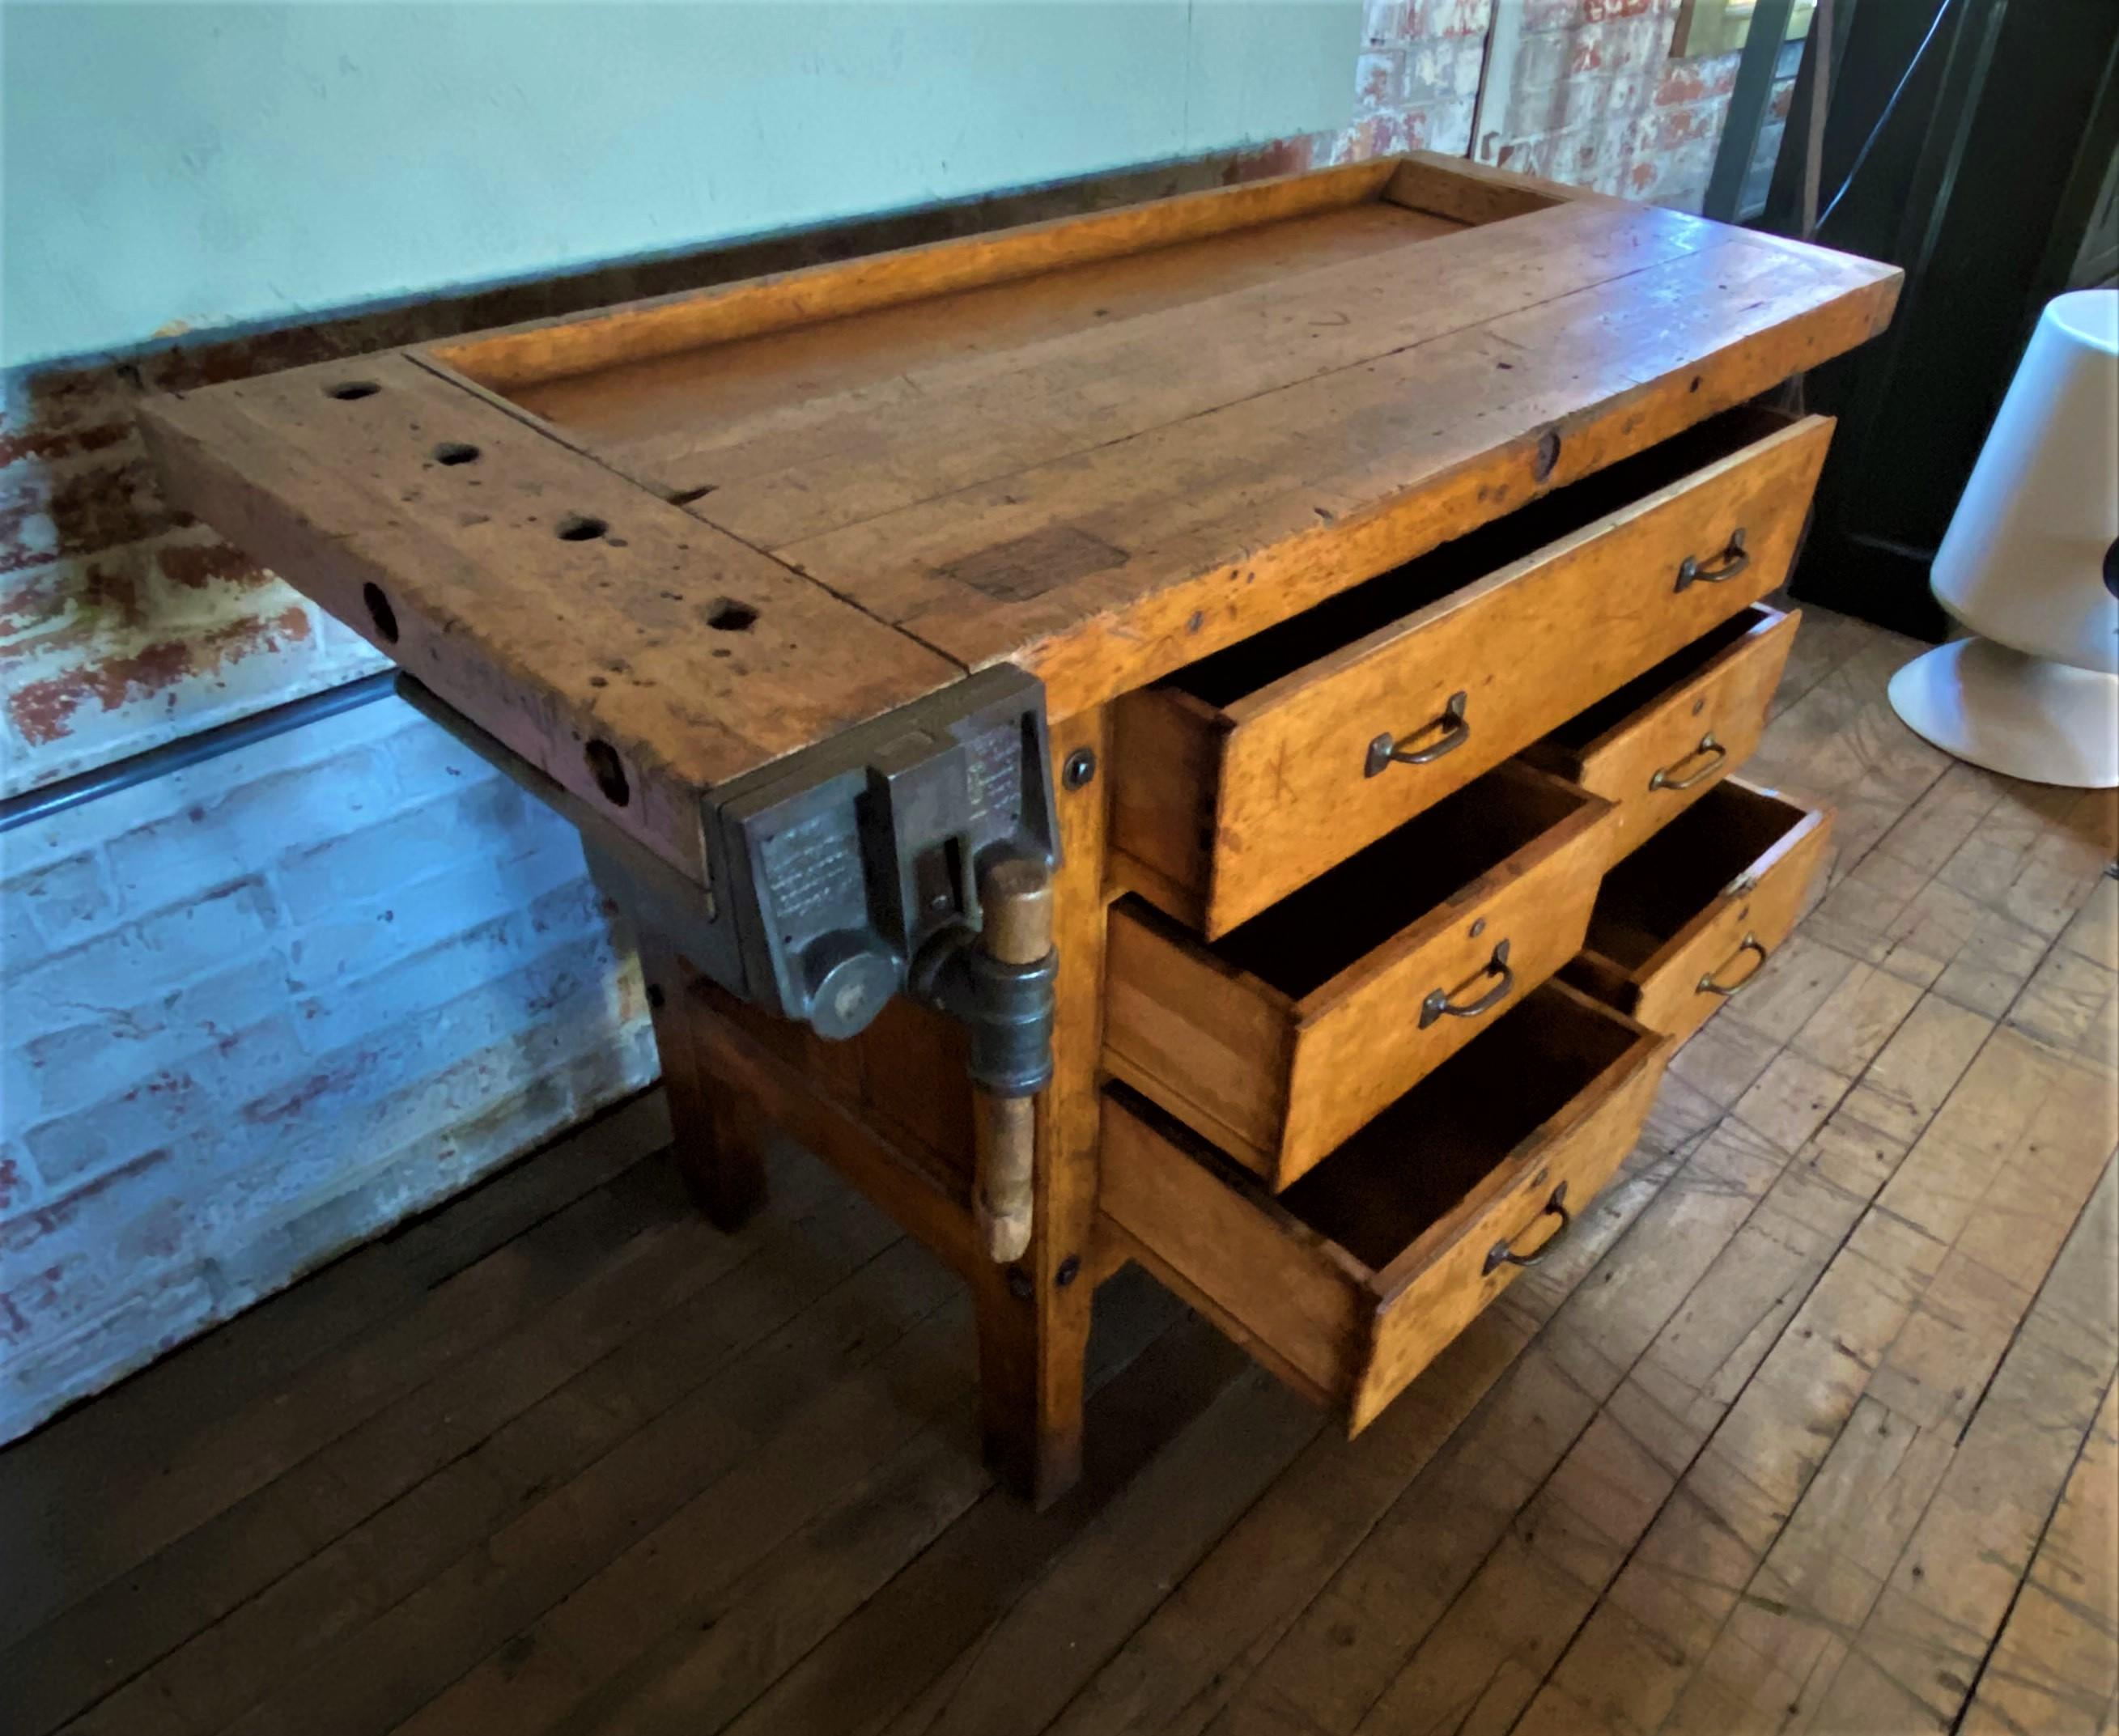 Carpenter's 5 Drawer work bench
Overall Dimensions: 22